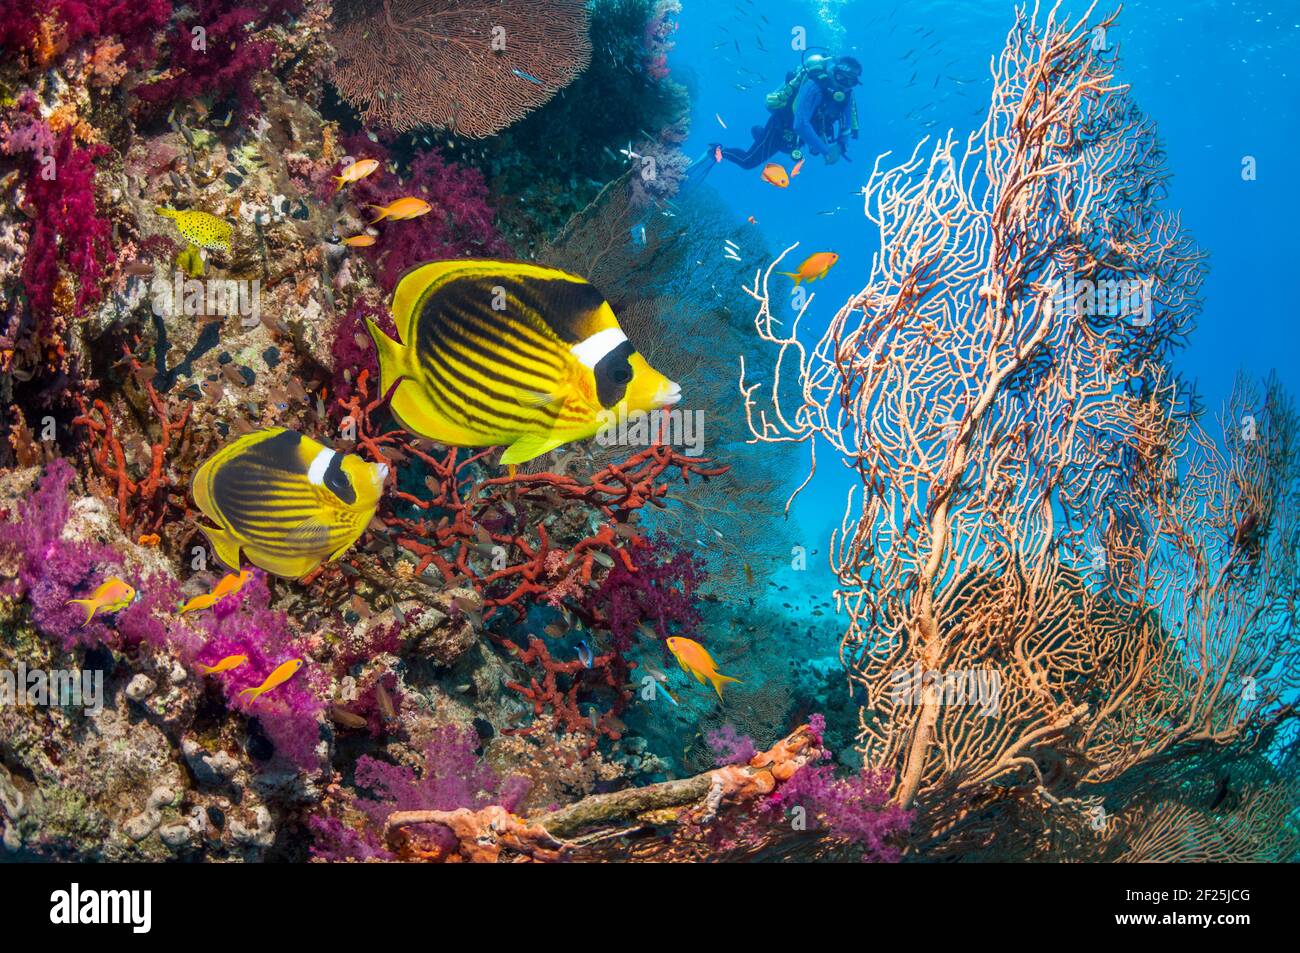 Red Sea raccoon butterflyfish [Chaetodon fasciatus] swimming over coral reef with a scuba diver in background.  Egypt, Red Sea. Stock Photo